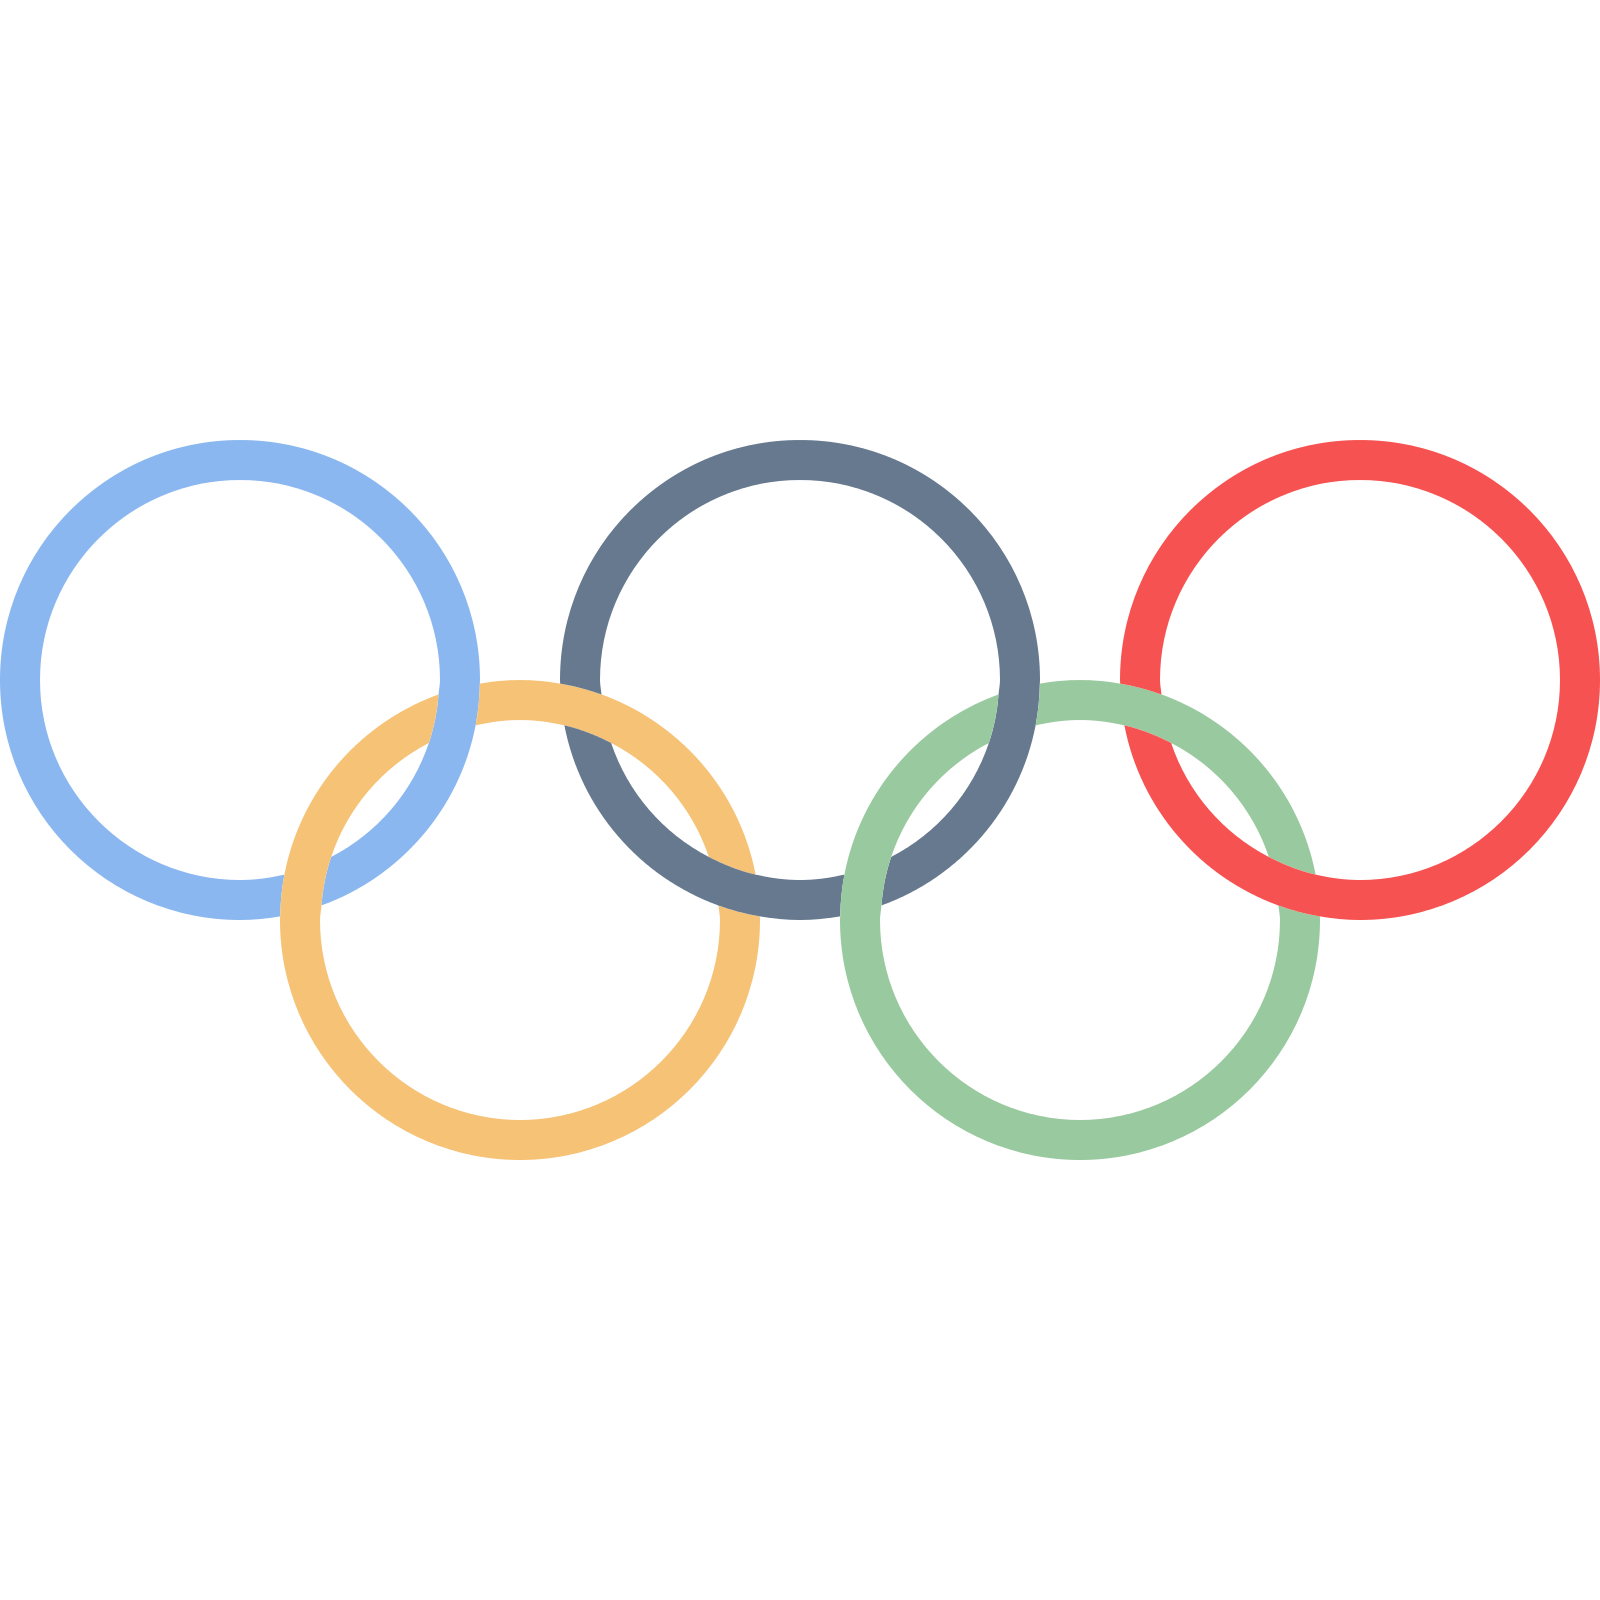 Olympic rings logo PNG images 